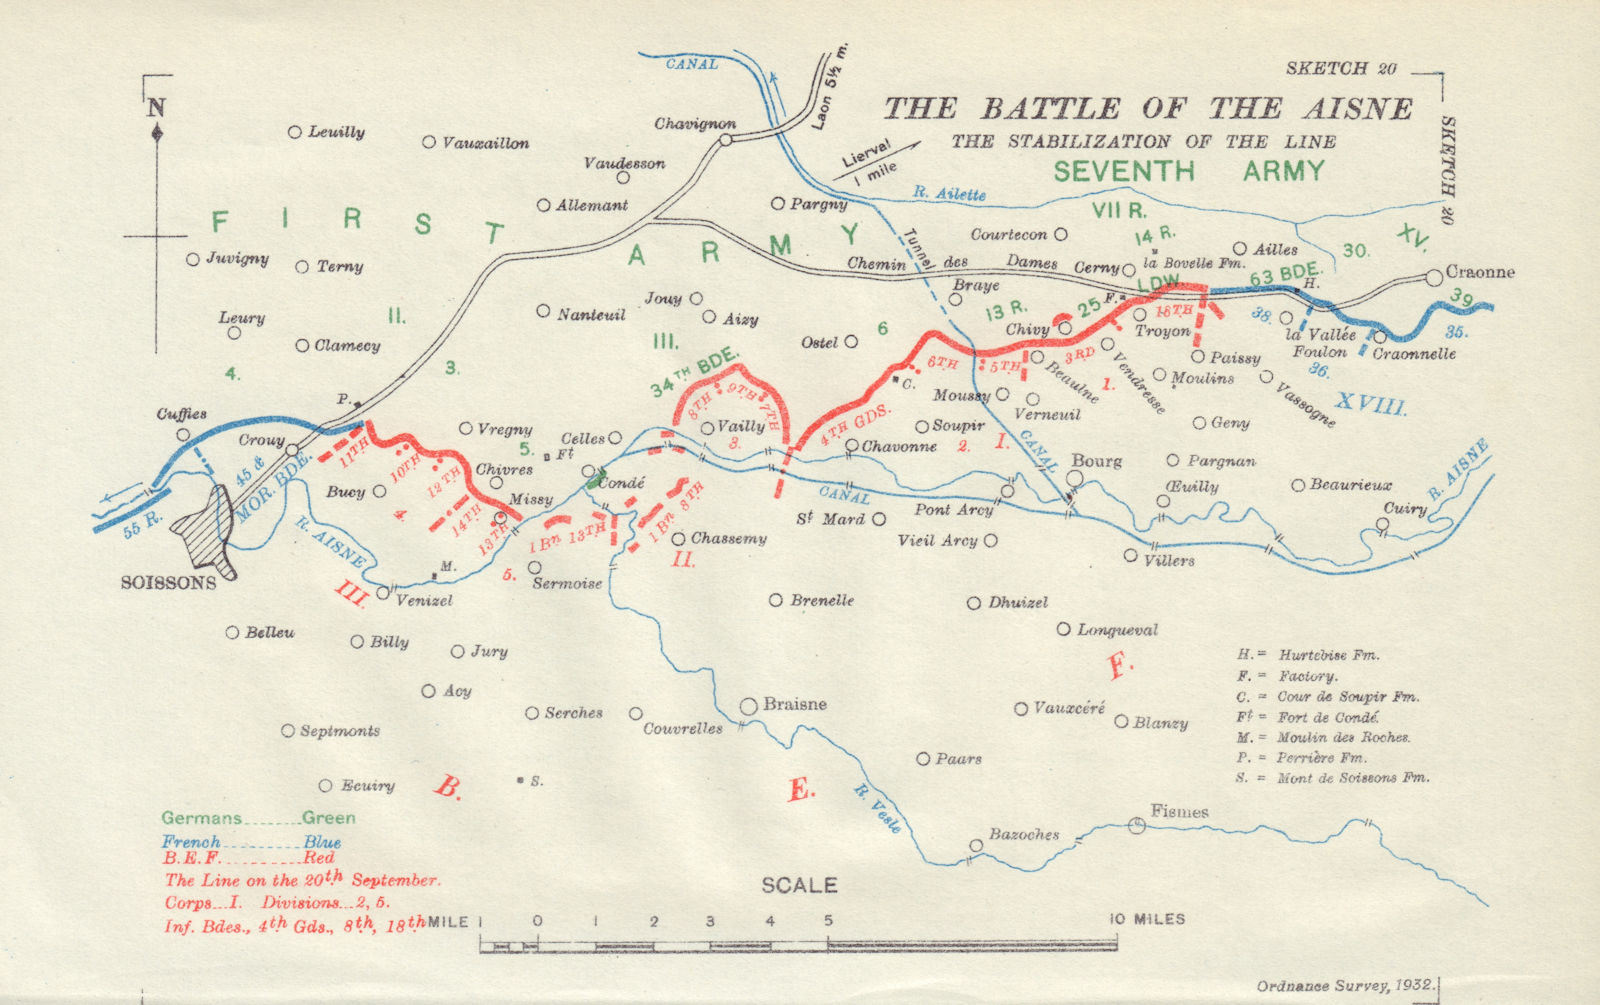 Battle of the Aisne. Stabilization of the Line. 20th Sept 1914. WW1. 1933 map